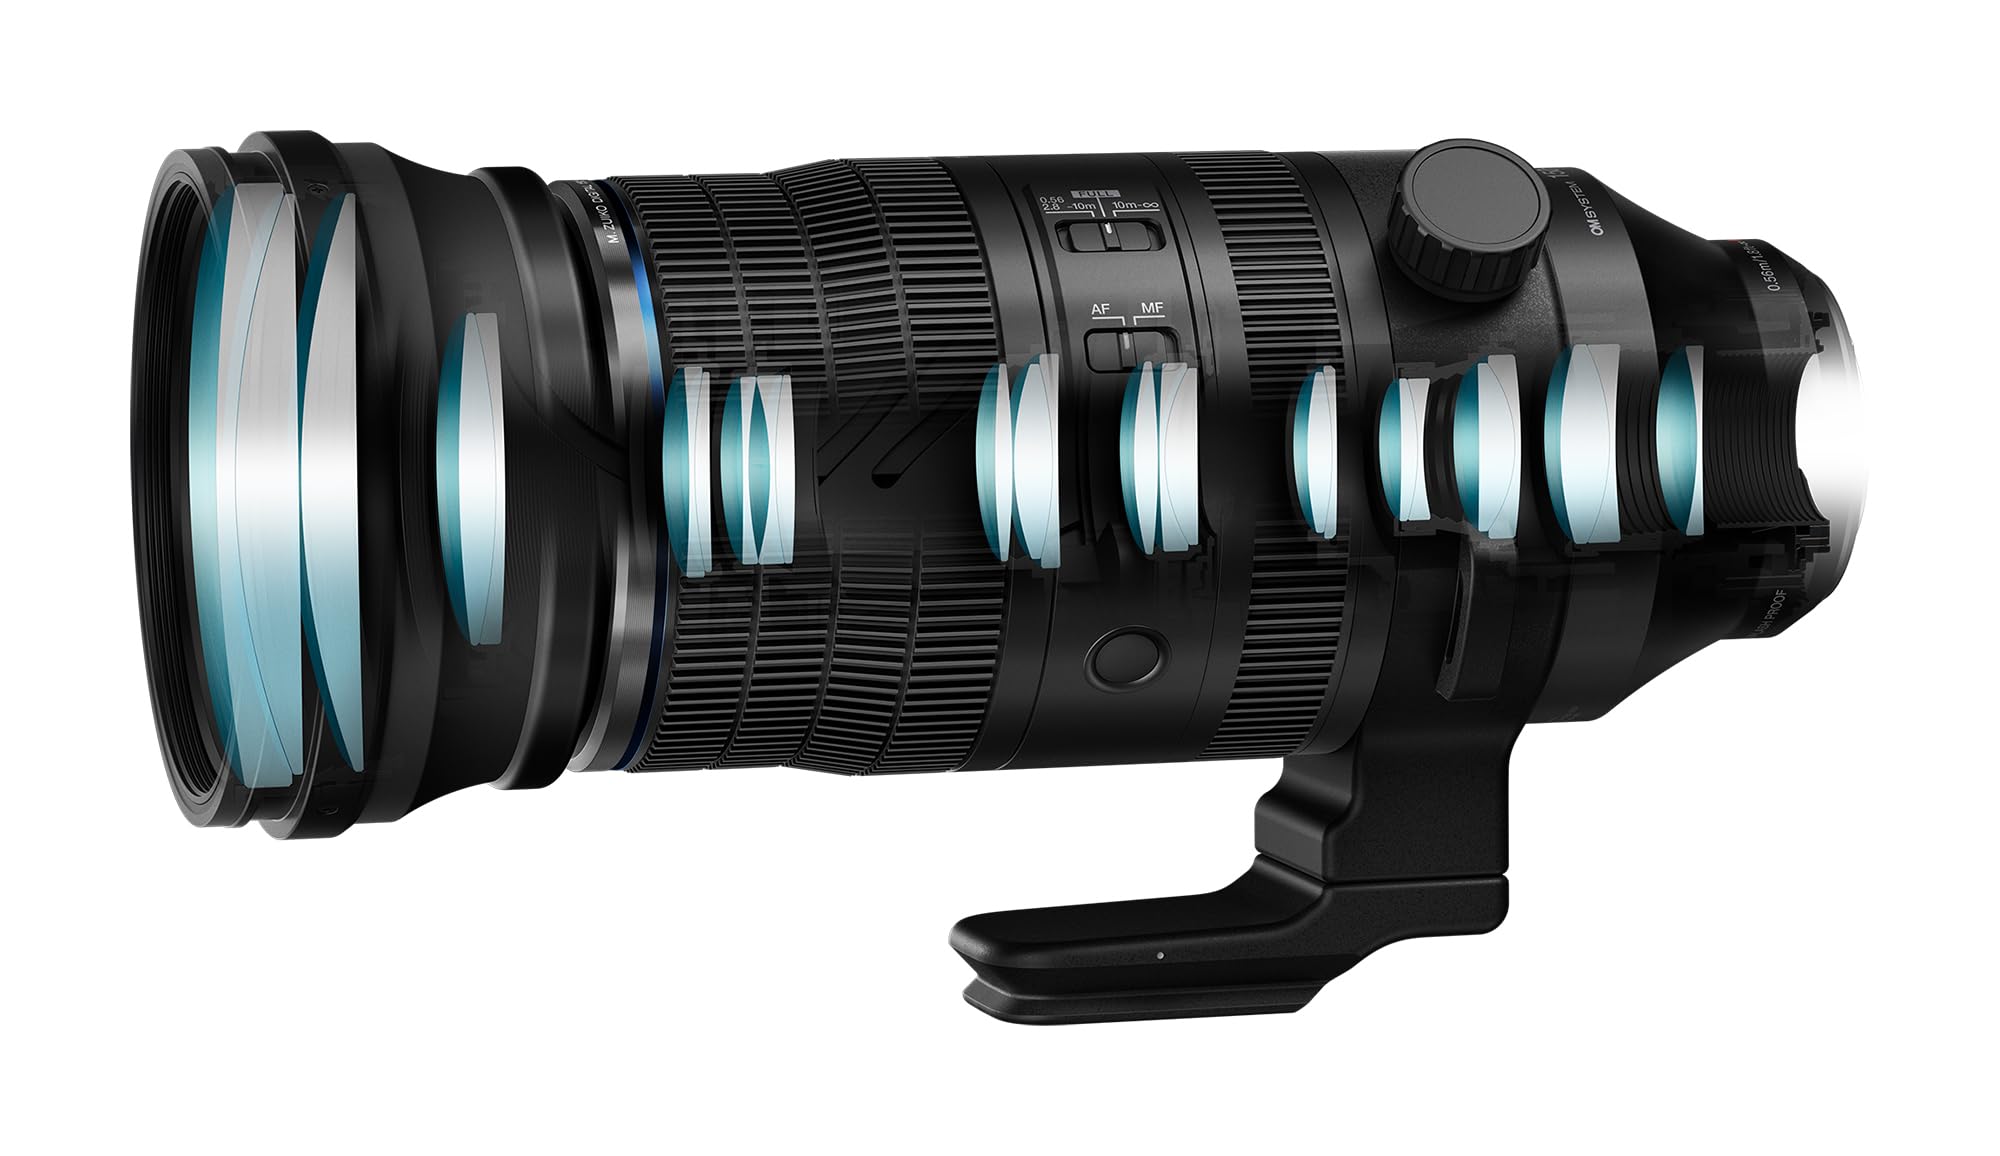 OM SYSTEM M.Zuiko Digital ED 150-600mm F5.0-6.3 is for Micro Four Thirds System Camera, Outdoor Bird Wildlife, Weather Sealed Design, Telephoto Compatible with Teleconverter